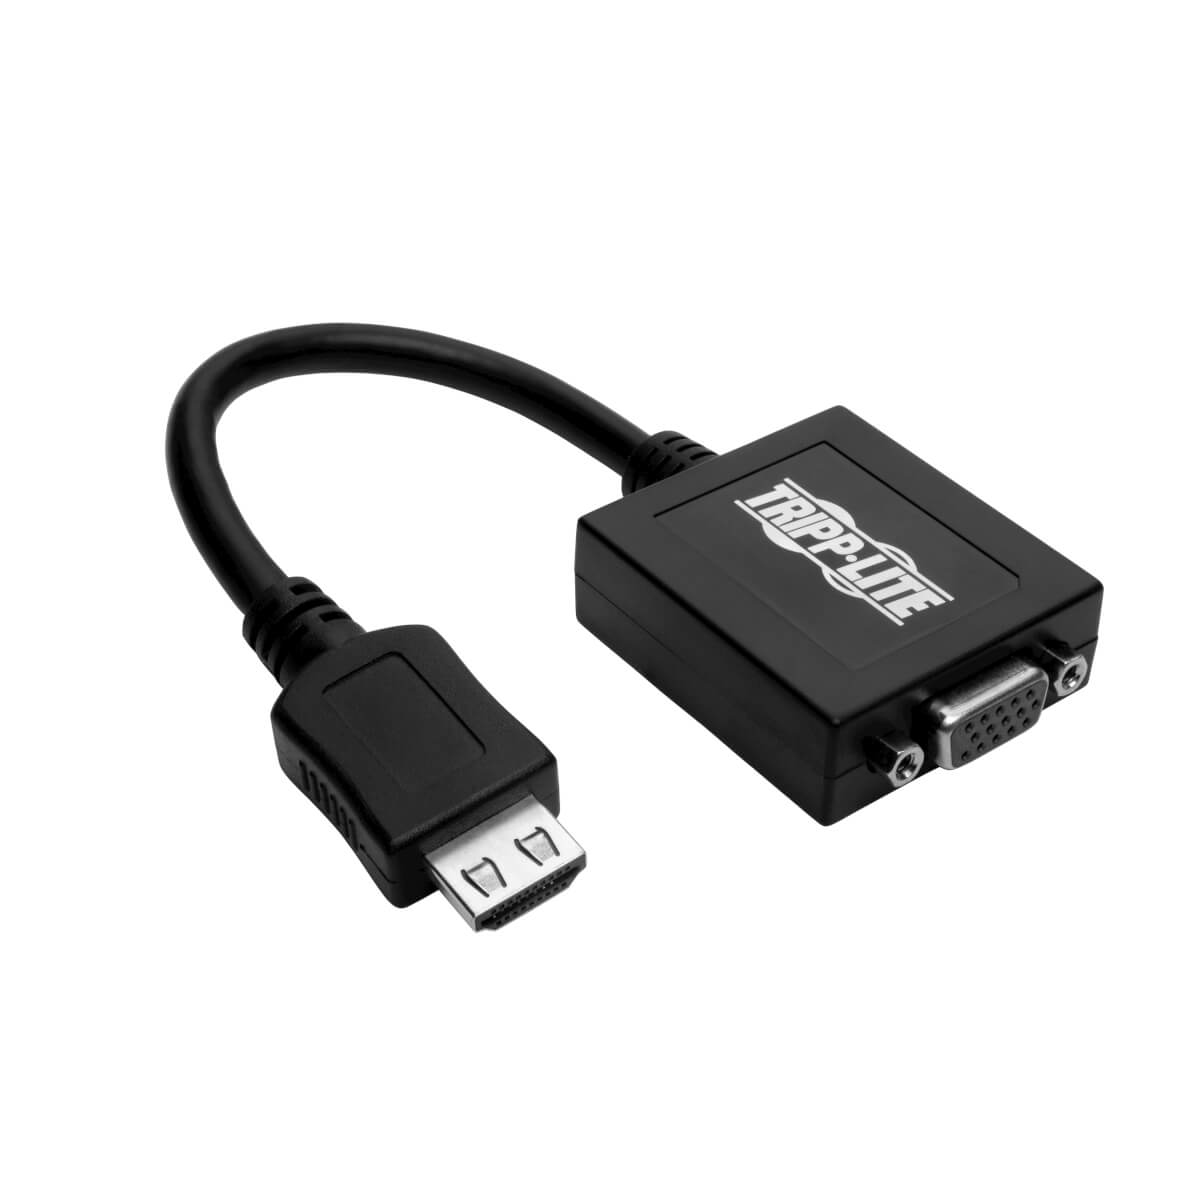 Photos - Cable (video, audio, USB) TrippLite Tripp Lite P131-06N HDMI to VGA with Audio Converter Cable Adapter for 